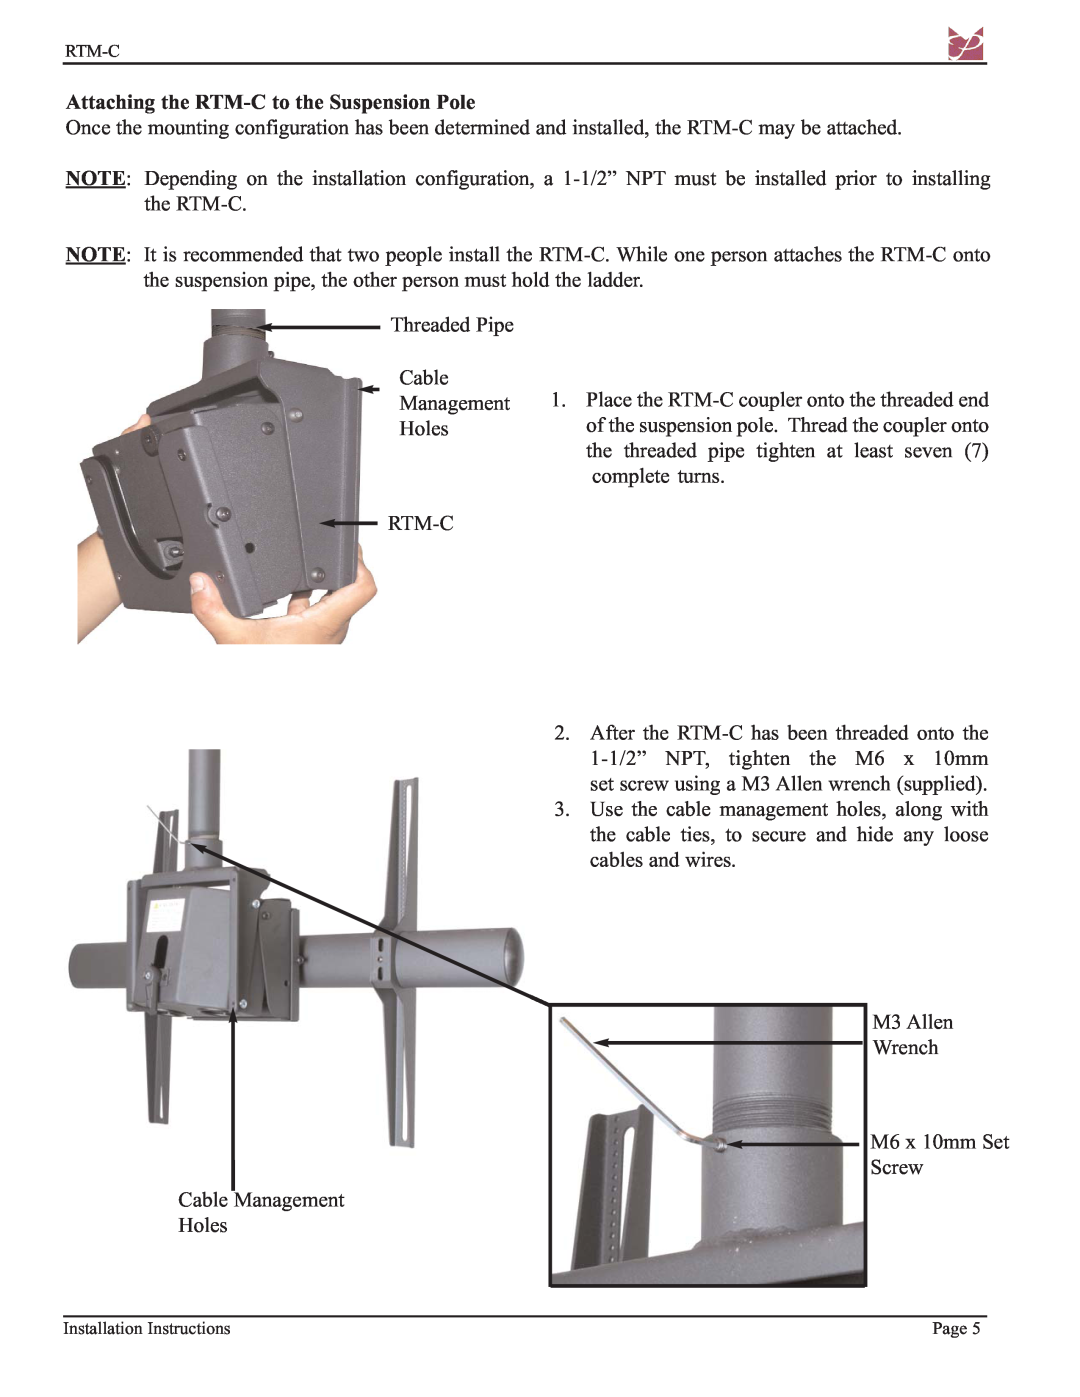 Premier Mounts RTM Series installation instructions Attaching the RTM-Cto the Suspension Pole 